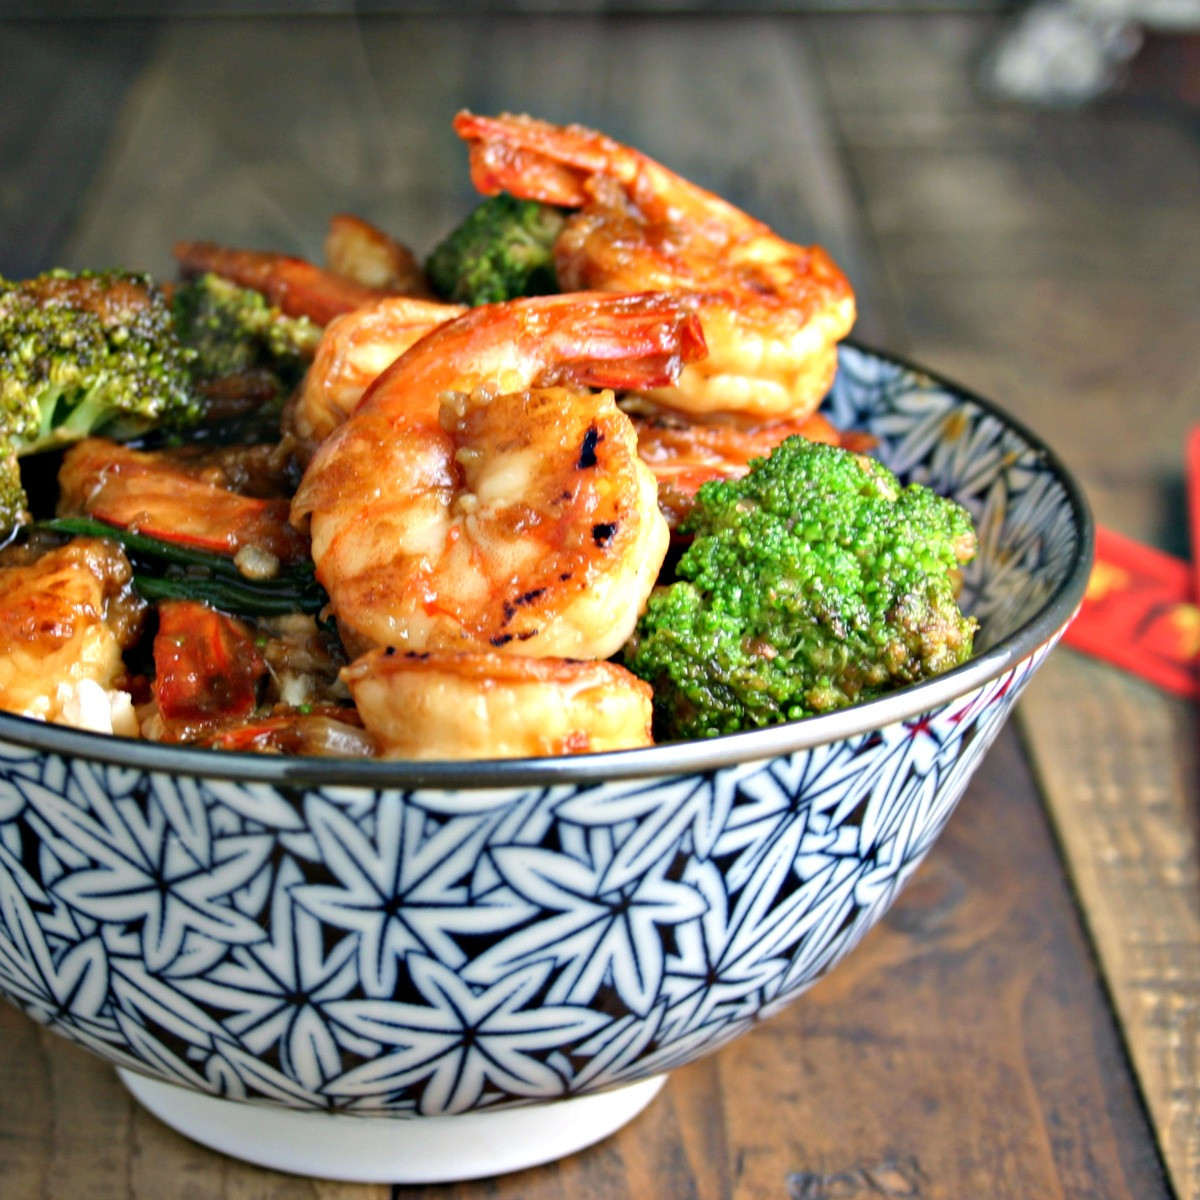 Shrimp And Broccoli
 Chinese Shrimp and Broccoli Stir Fry The Weary Chef